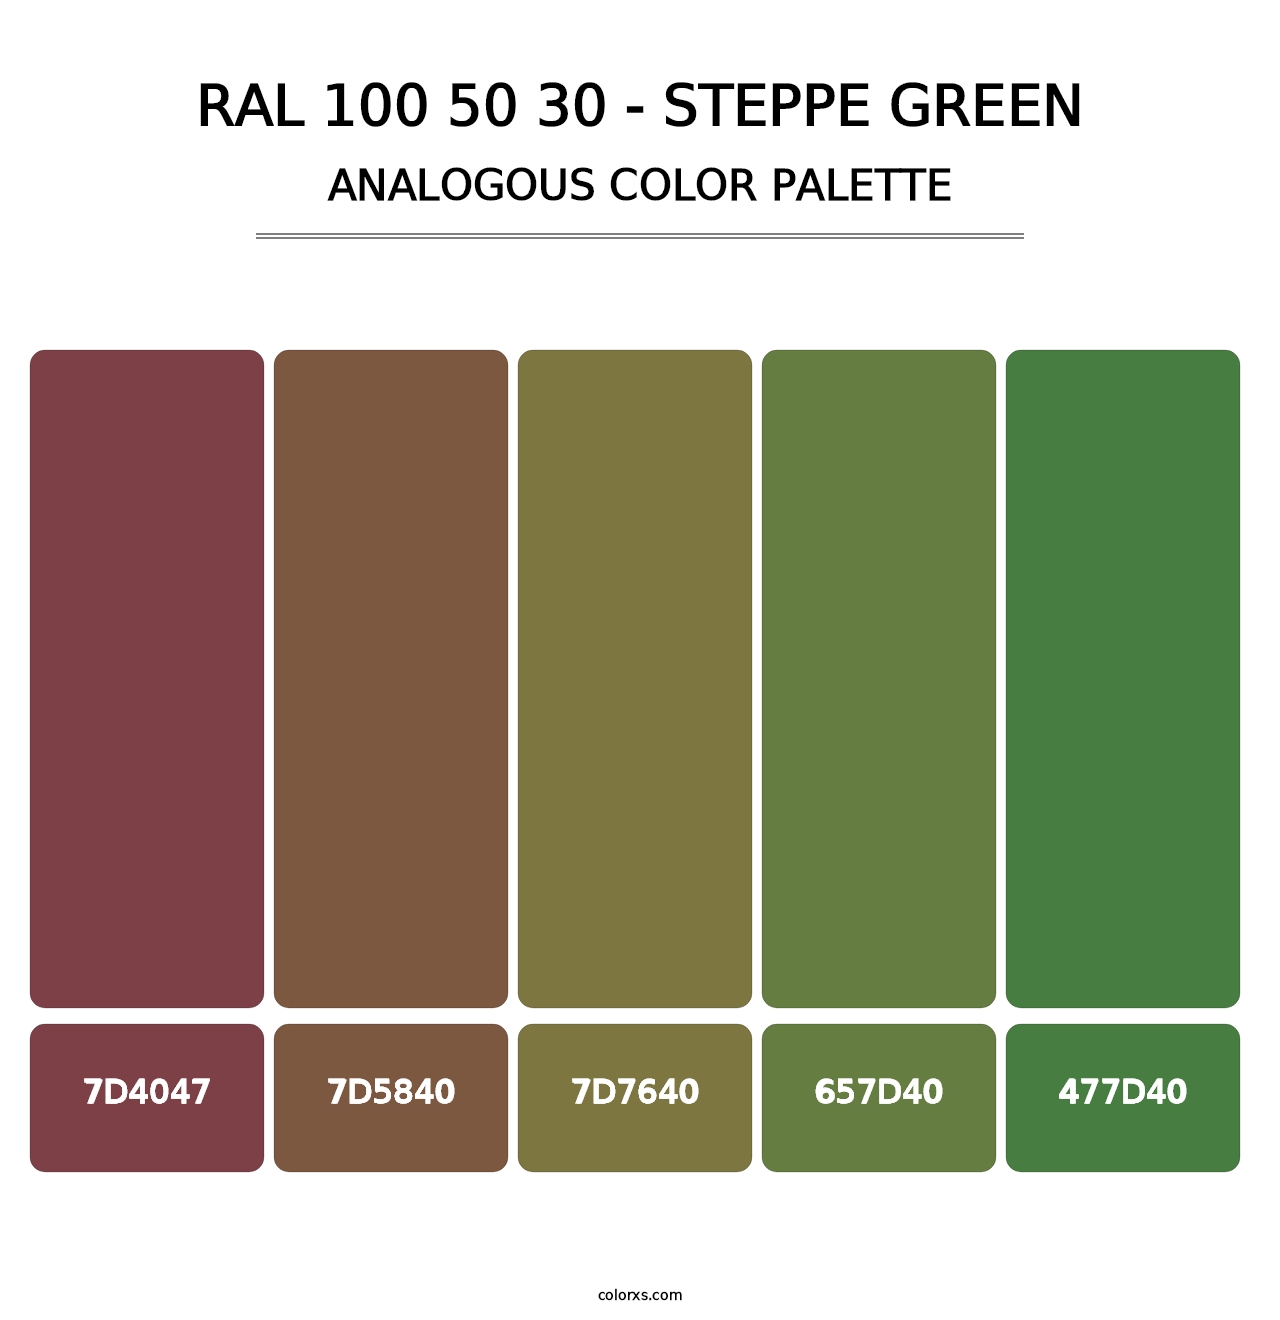 RAL 100 50 30 - Steppe Green - Analogous Color Palette